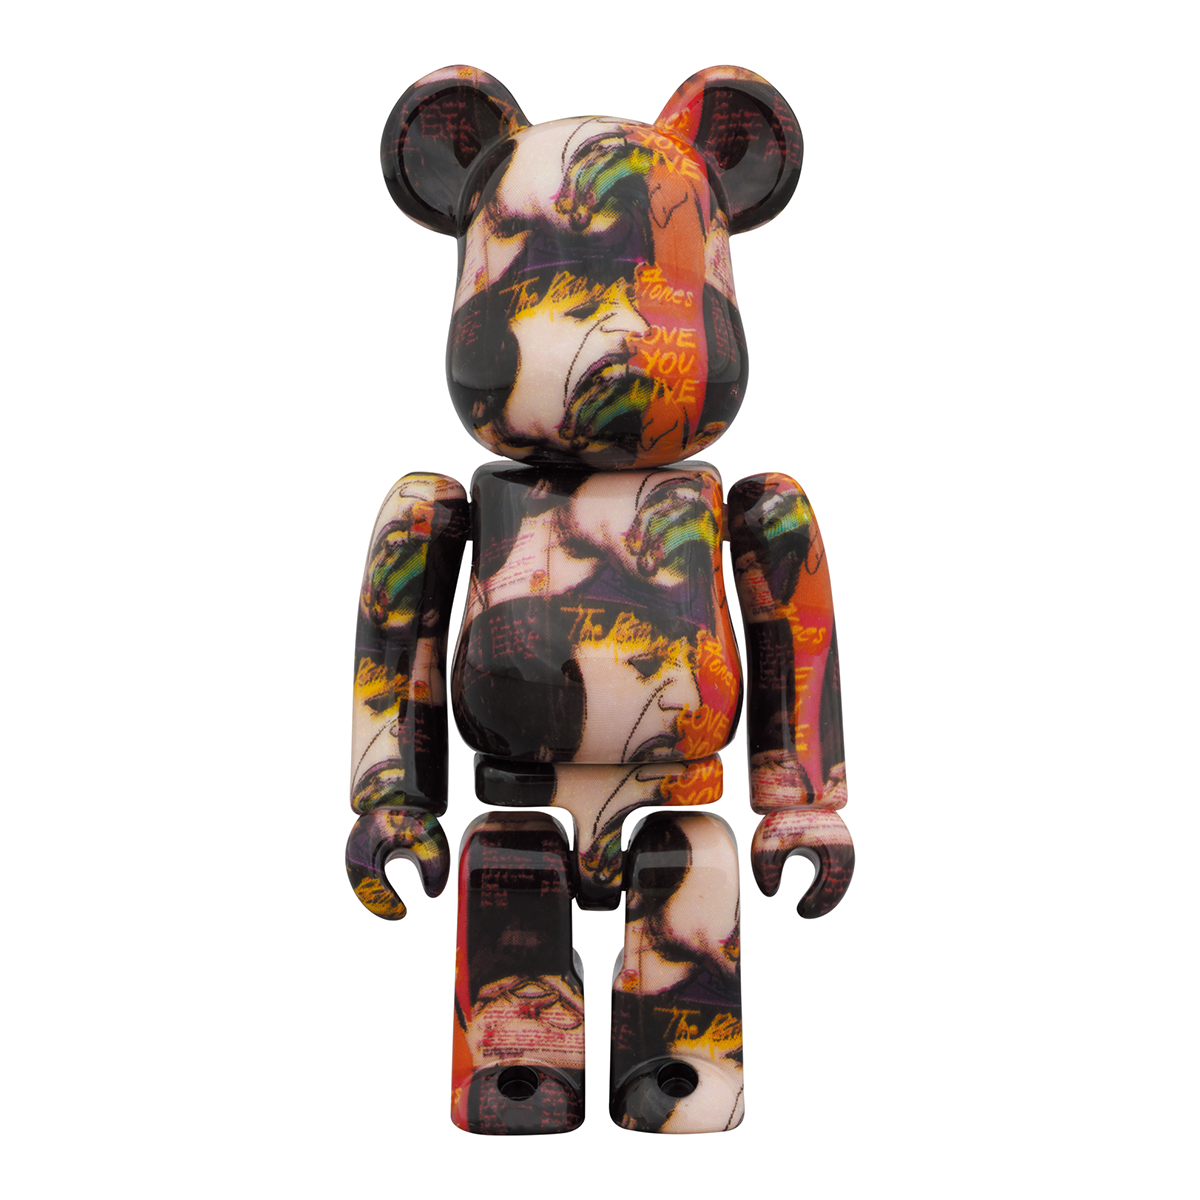 Rolling Stones Limited Edition Steiff Bear at $400